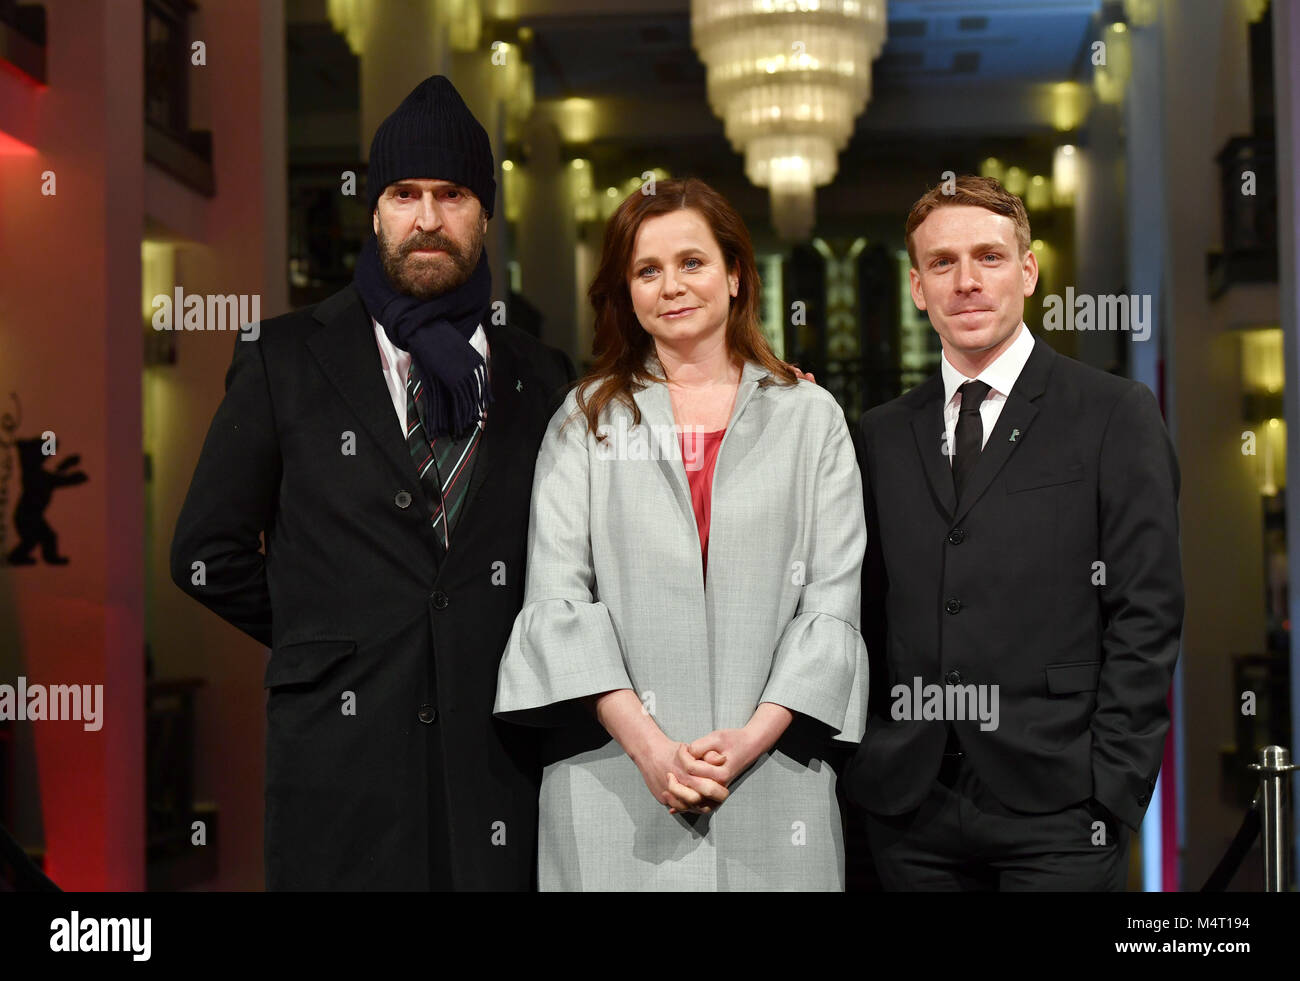 Rupert Everett (L), director, actor, screenwriter, with actress Emily Watson and actor Edwin Thomas during the arrival at the Friedrichstadt-Palast during the Berlinale 2018 Film Festival in Berlin, Germany, 17 February 2018. The film runs in the 'Berlinale Special Gala' section of the 68th International Berlin Film Festival. Photo: Jens Kalaene/dpa Stock Photo